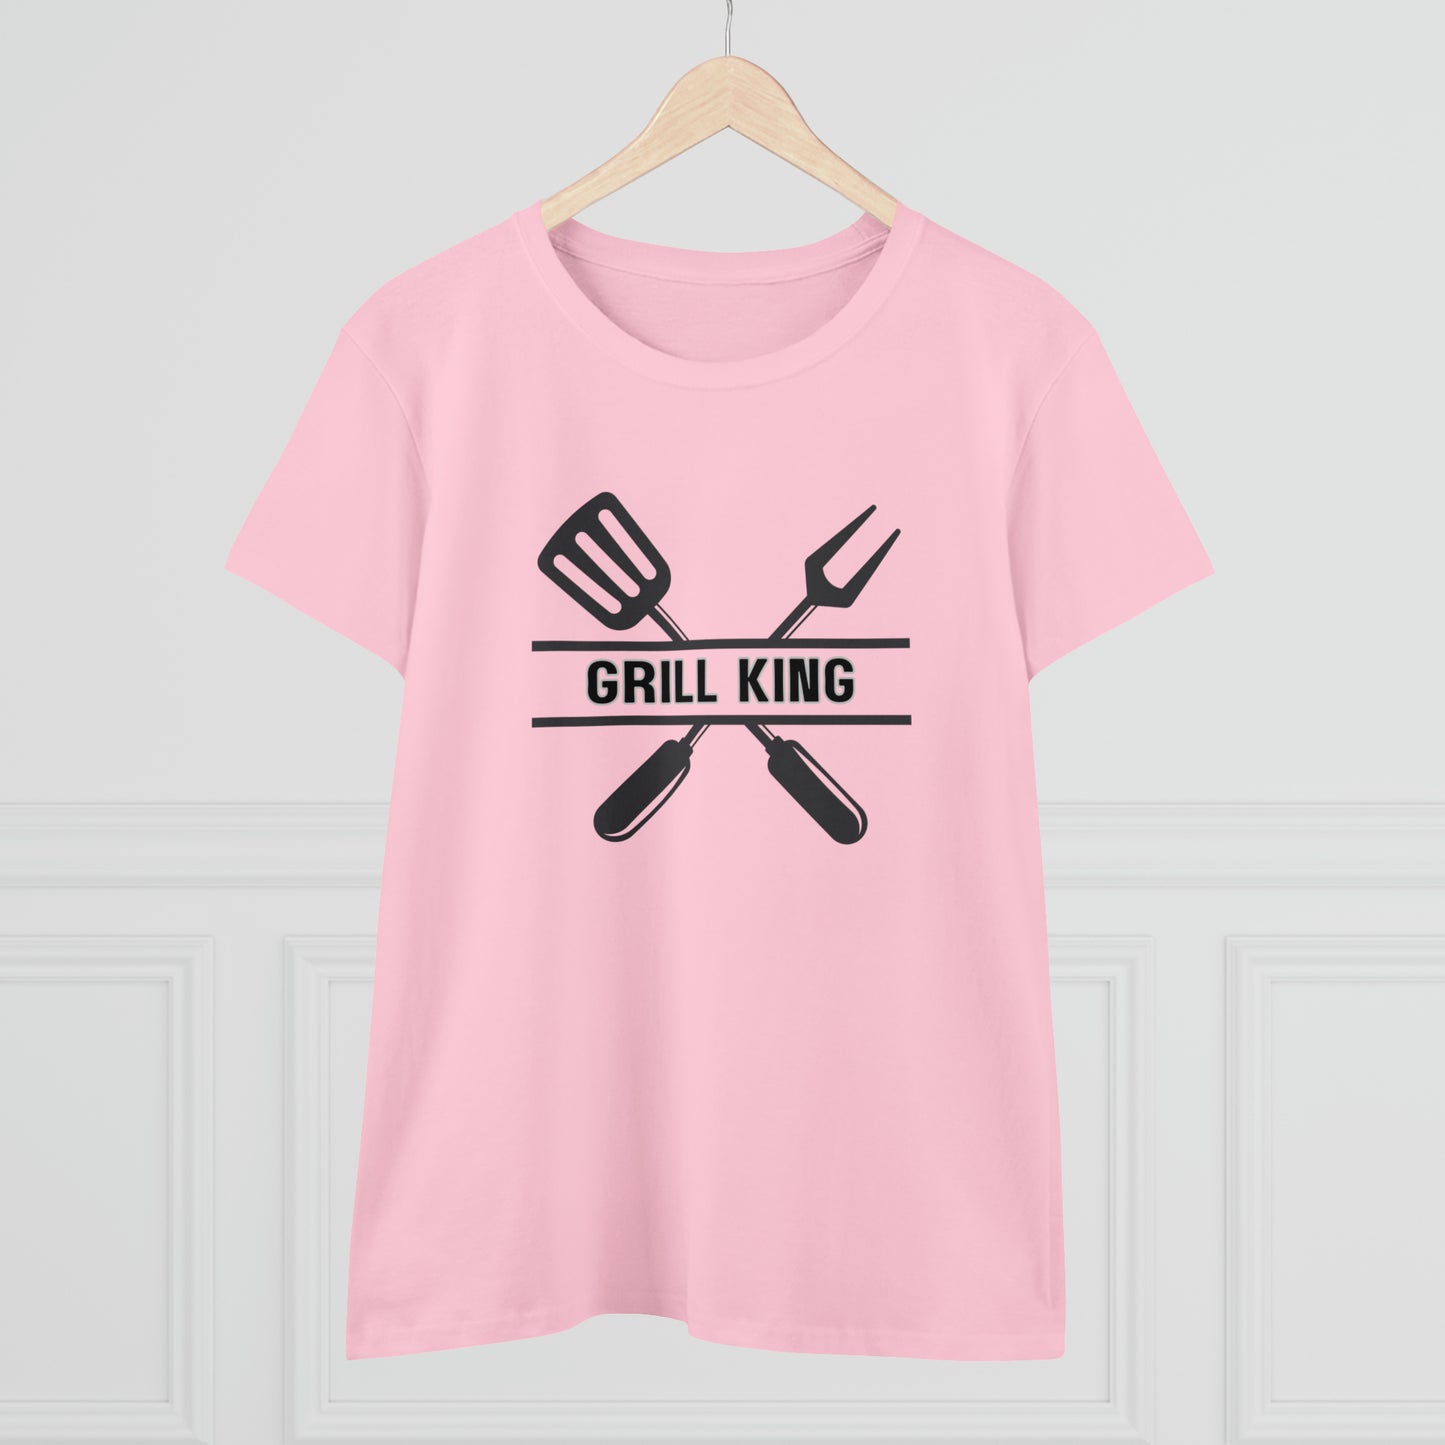 Hobby, Interests, Grilling, Grill King, Family, Dad, Mom- Adult, Semi-fitted, T-shirt